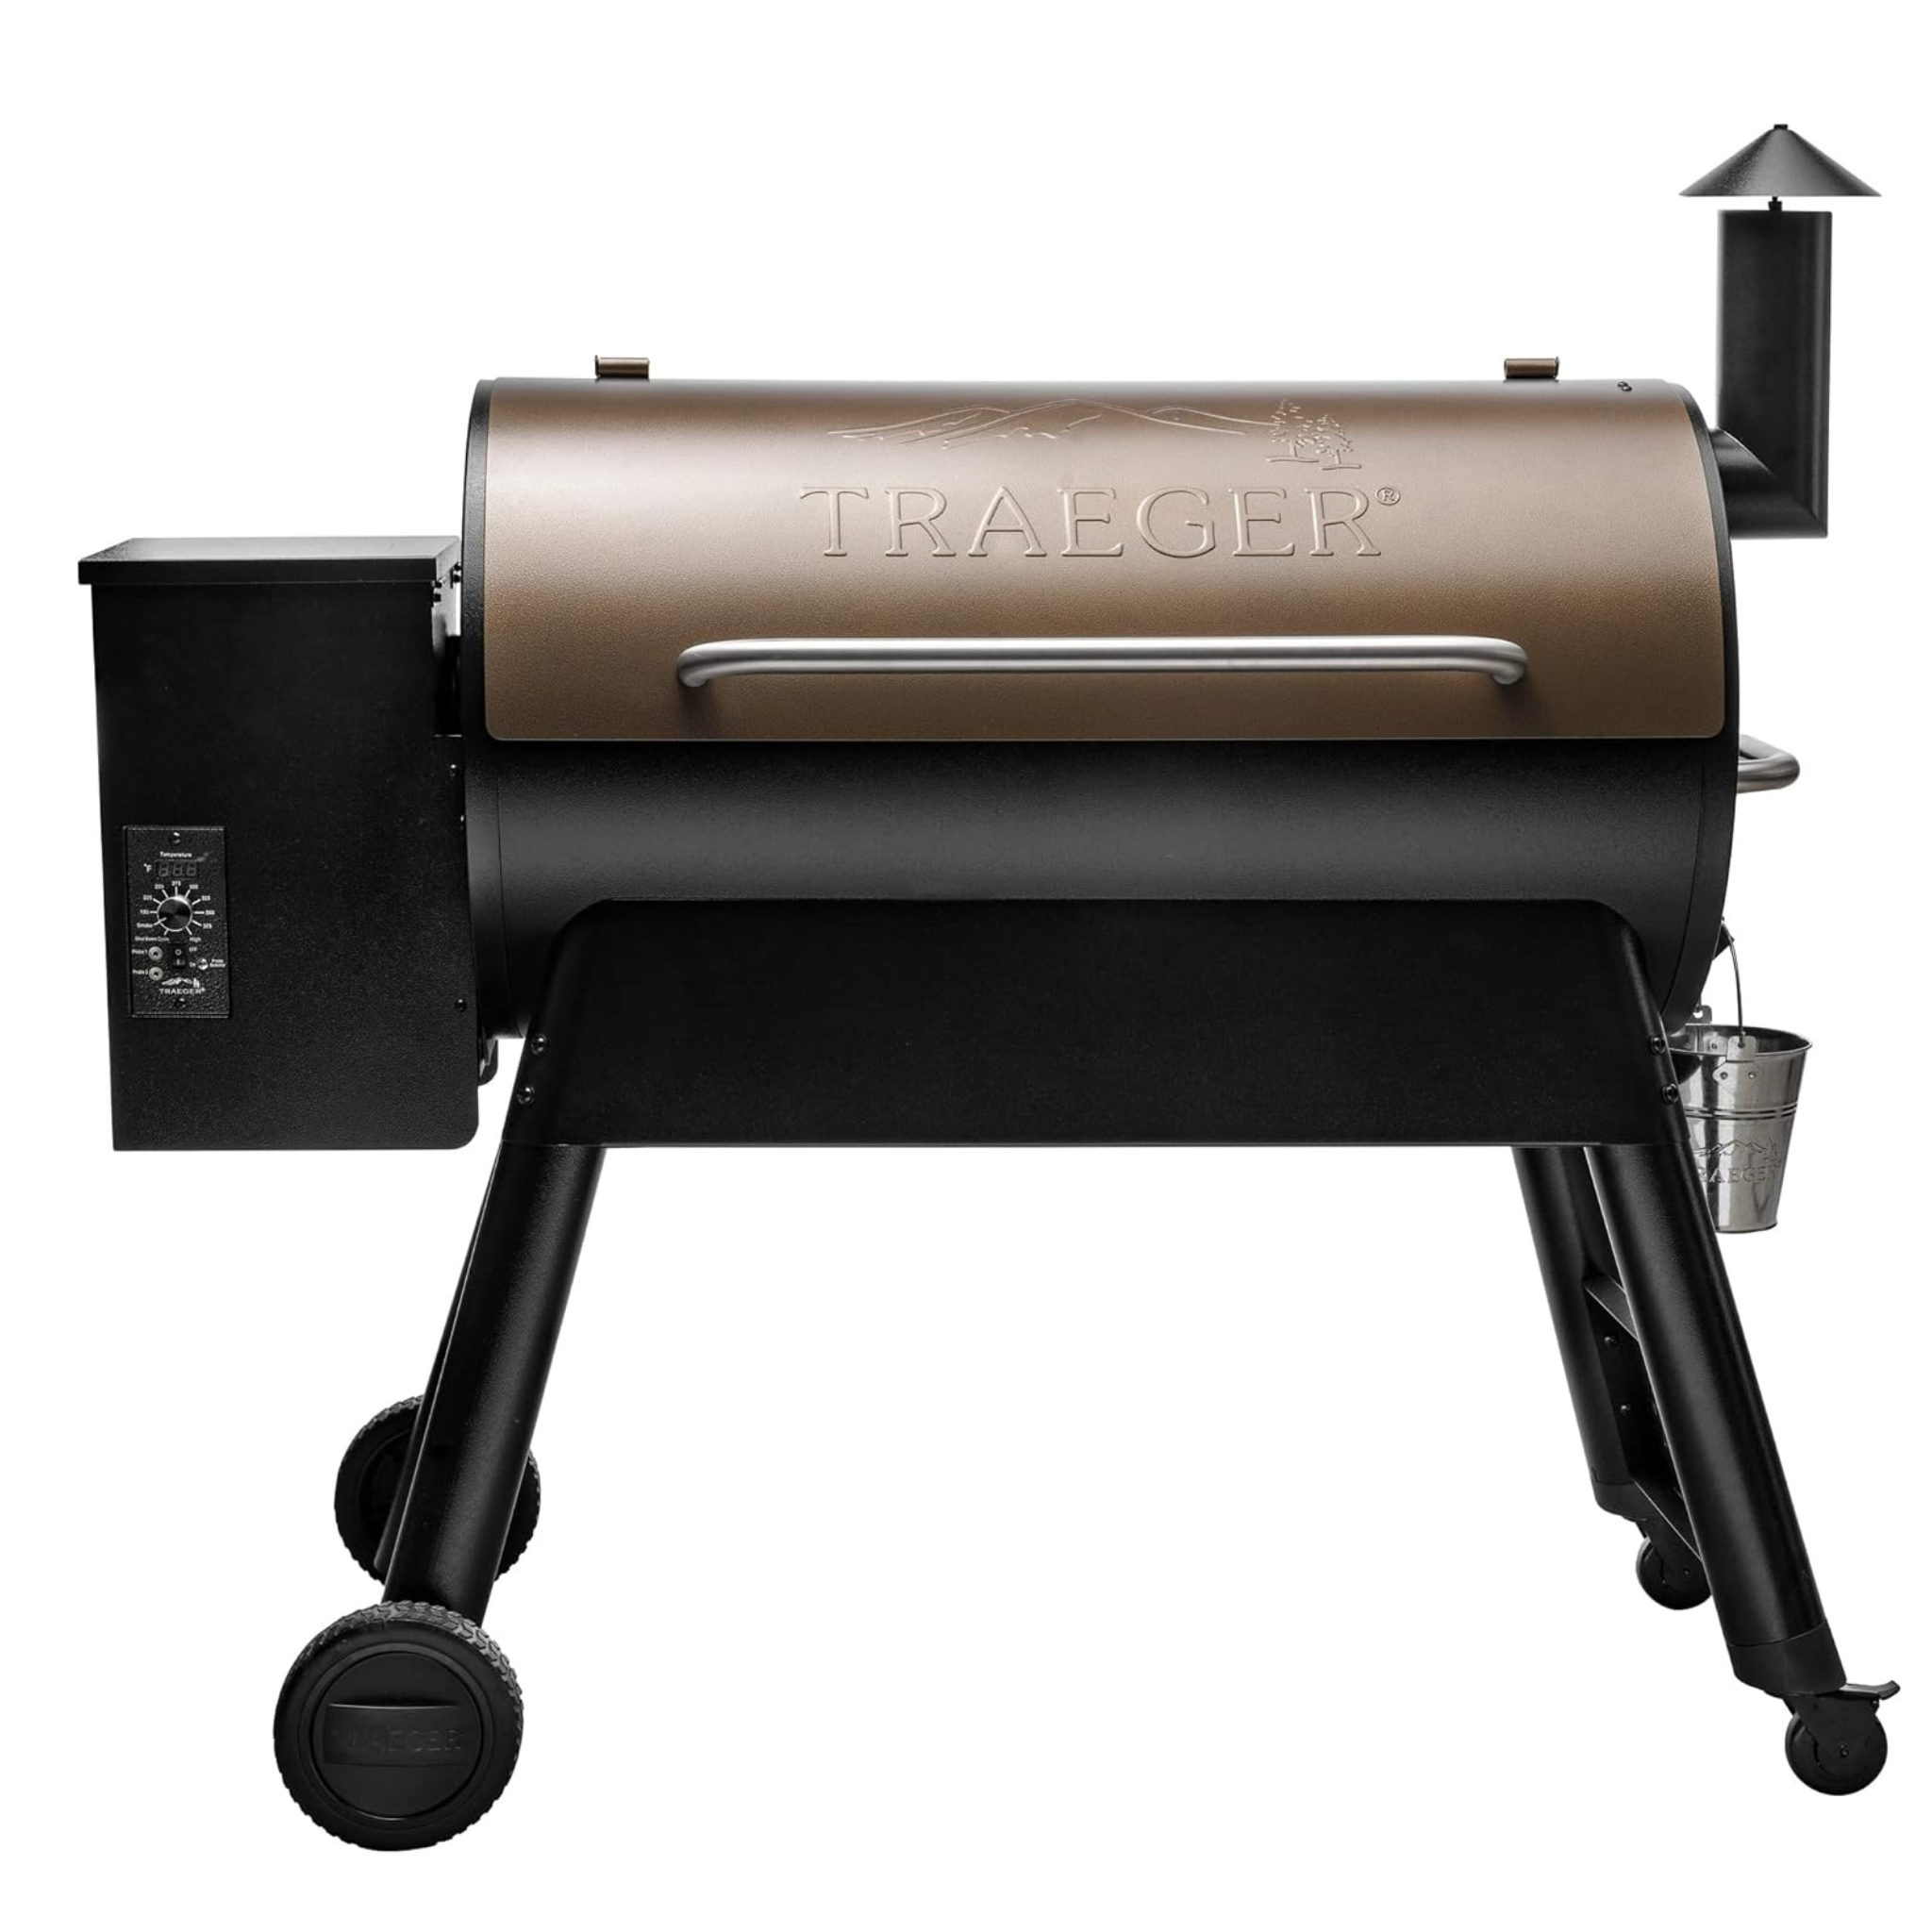 Traeger Grills Pro 34 Electric Wood Pellet Grill and Smoker